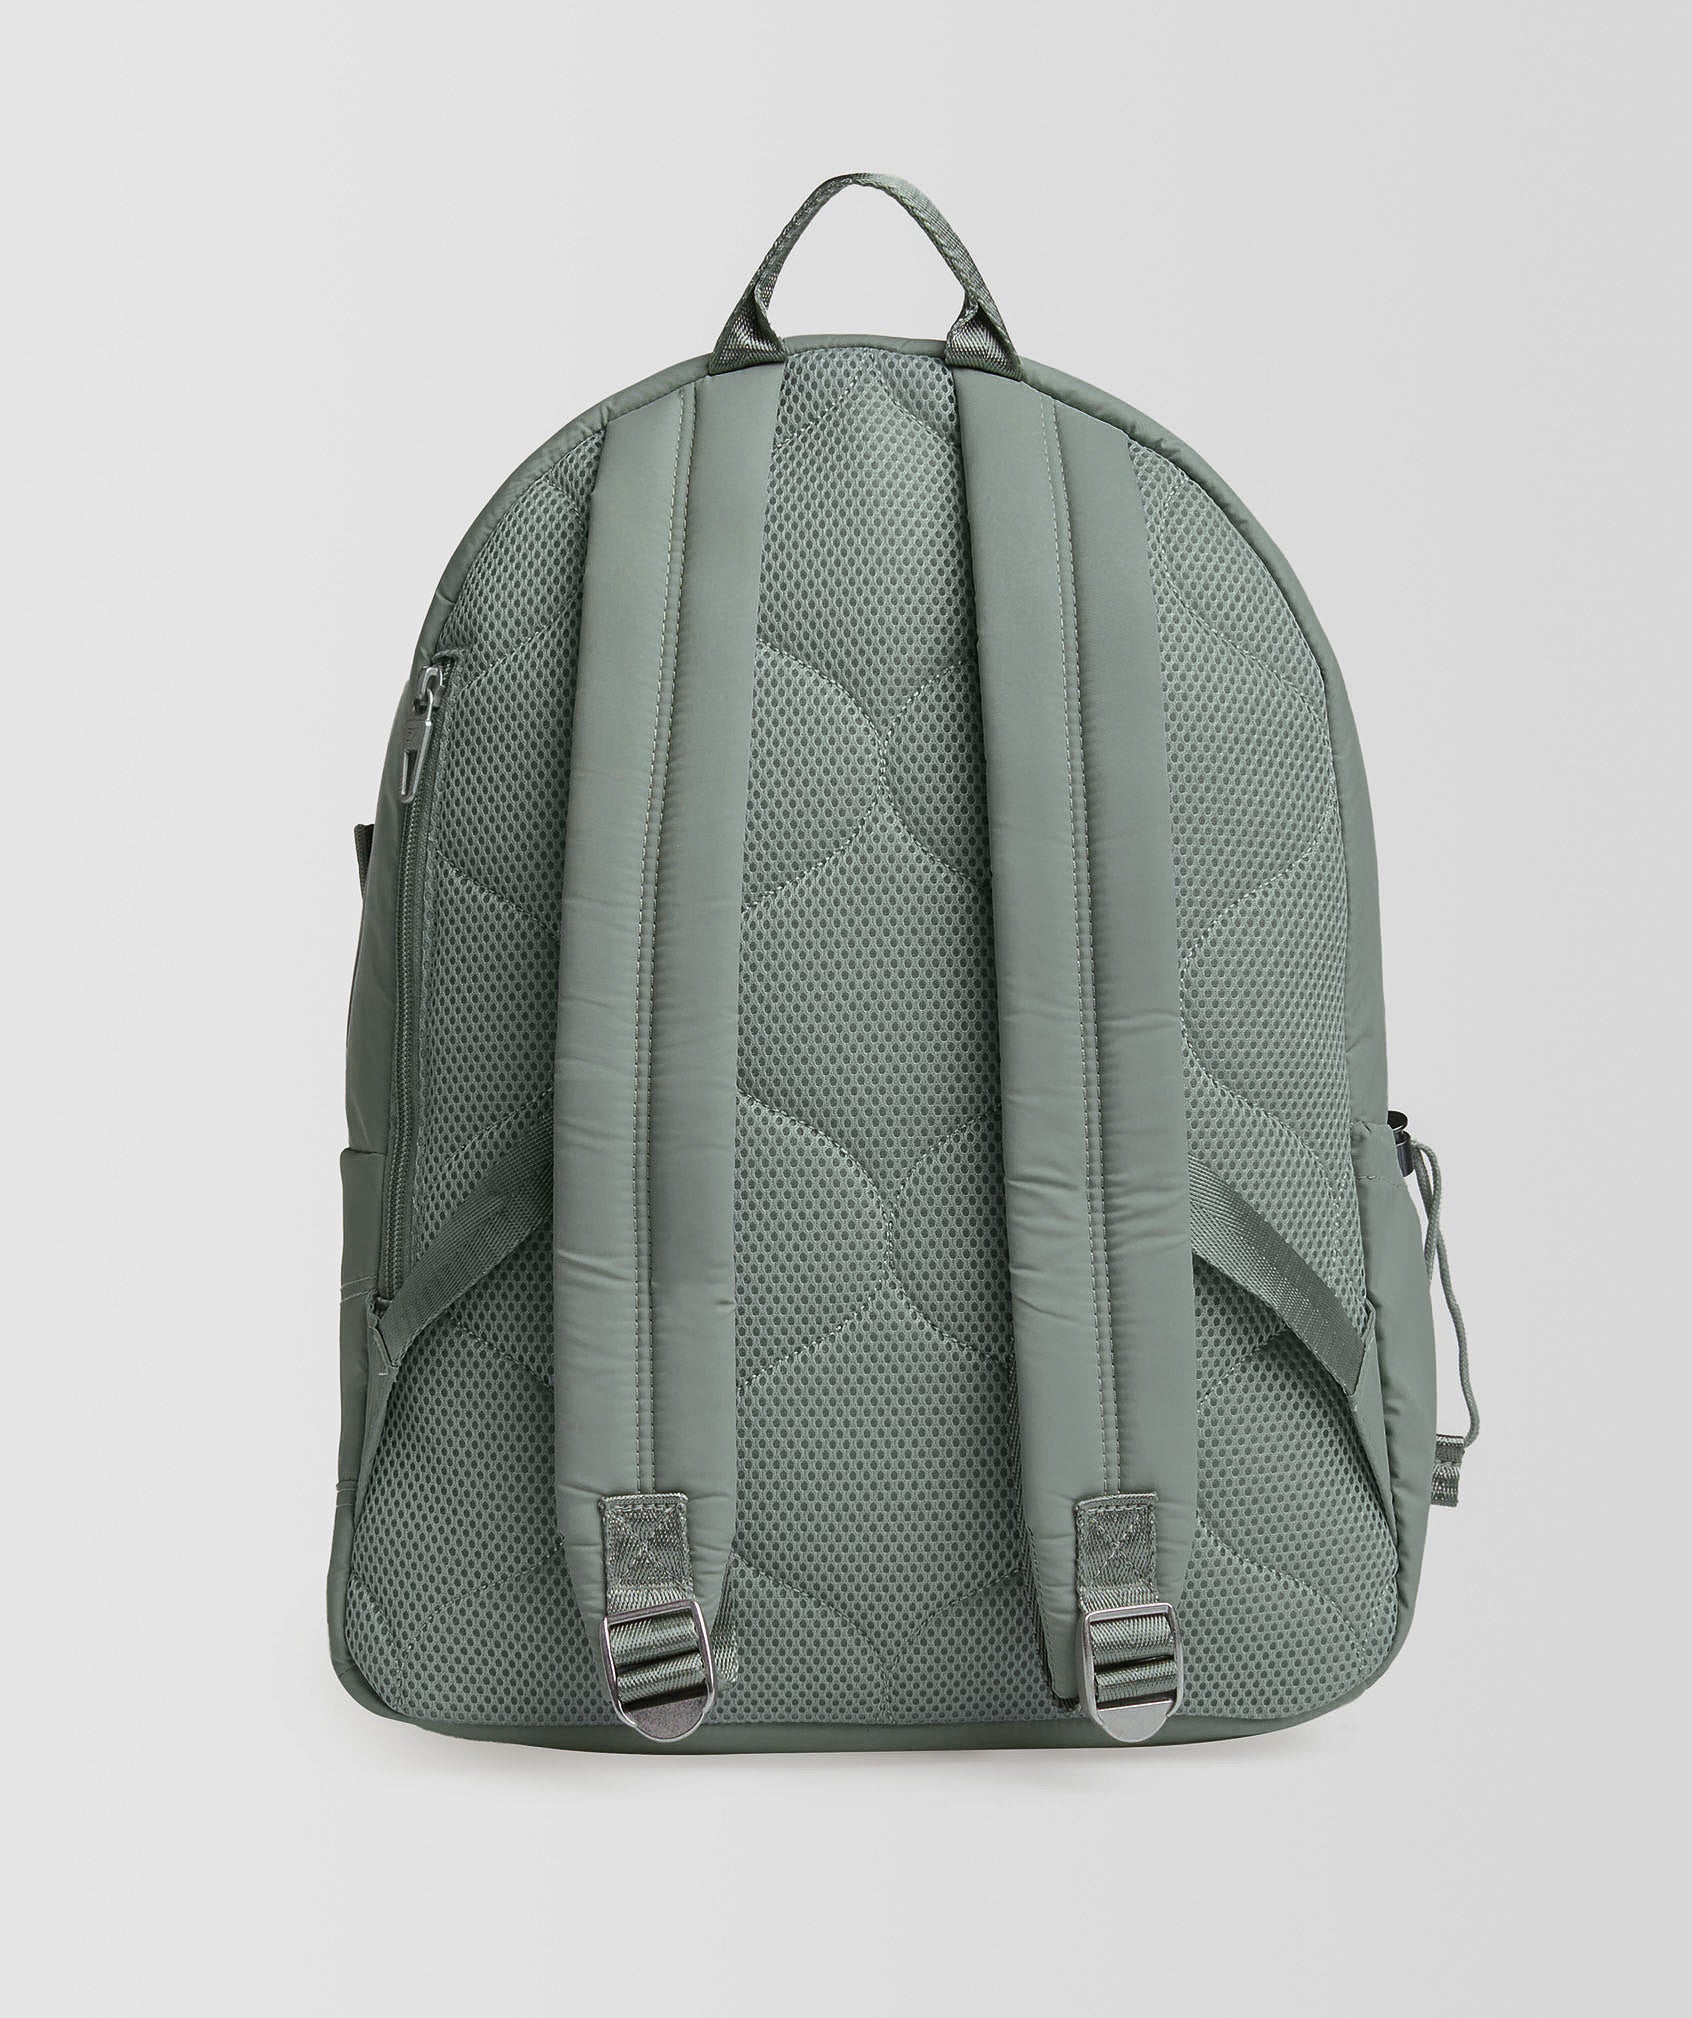 Gym Bags - Men's & Women's Sports Bags from Gymshark